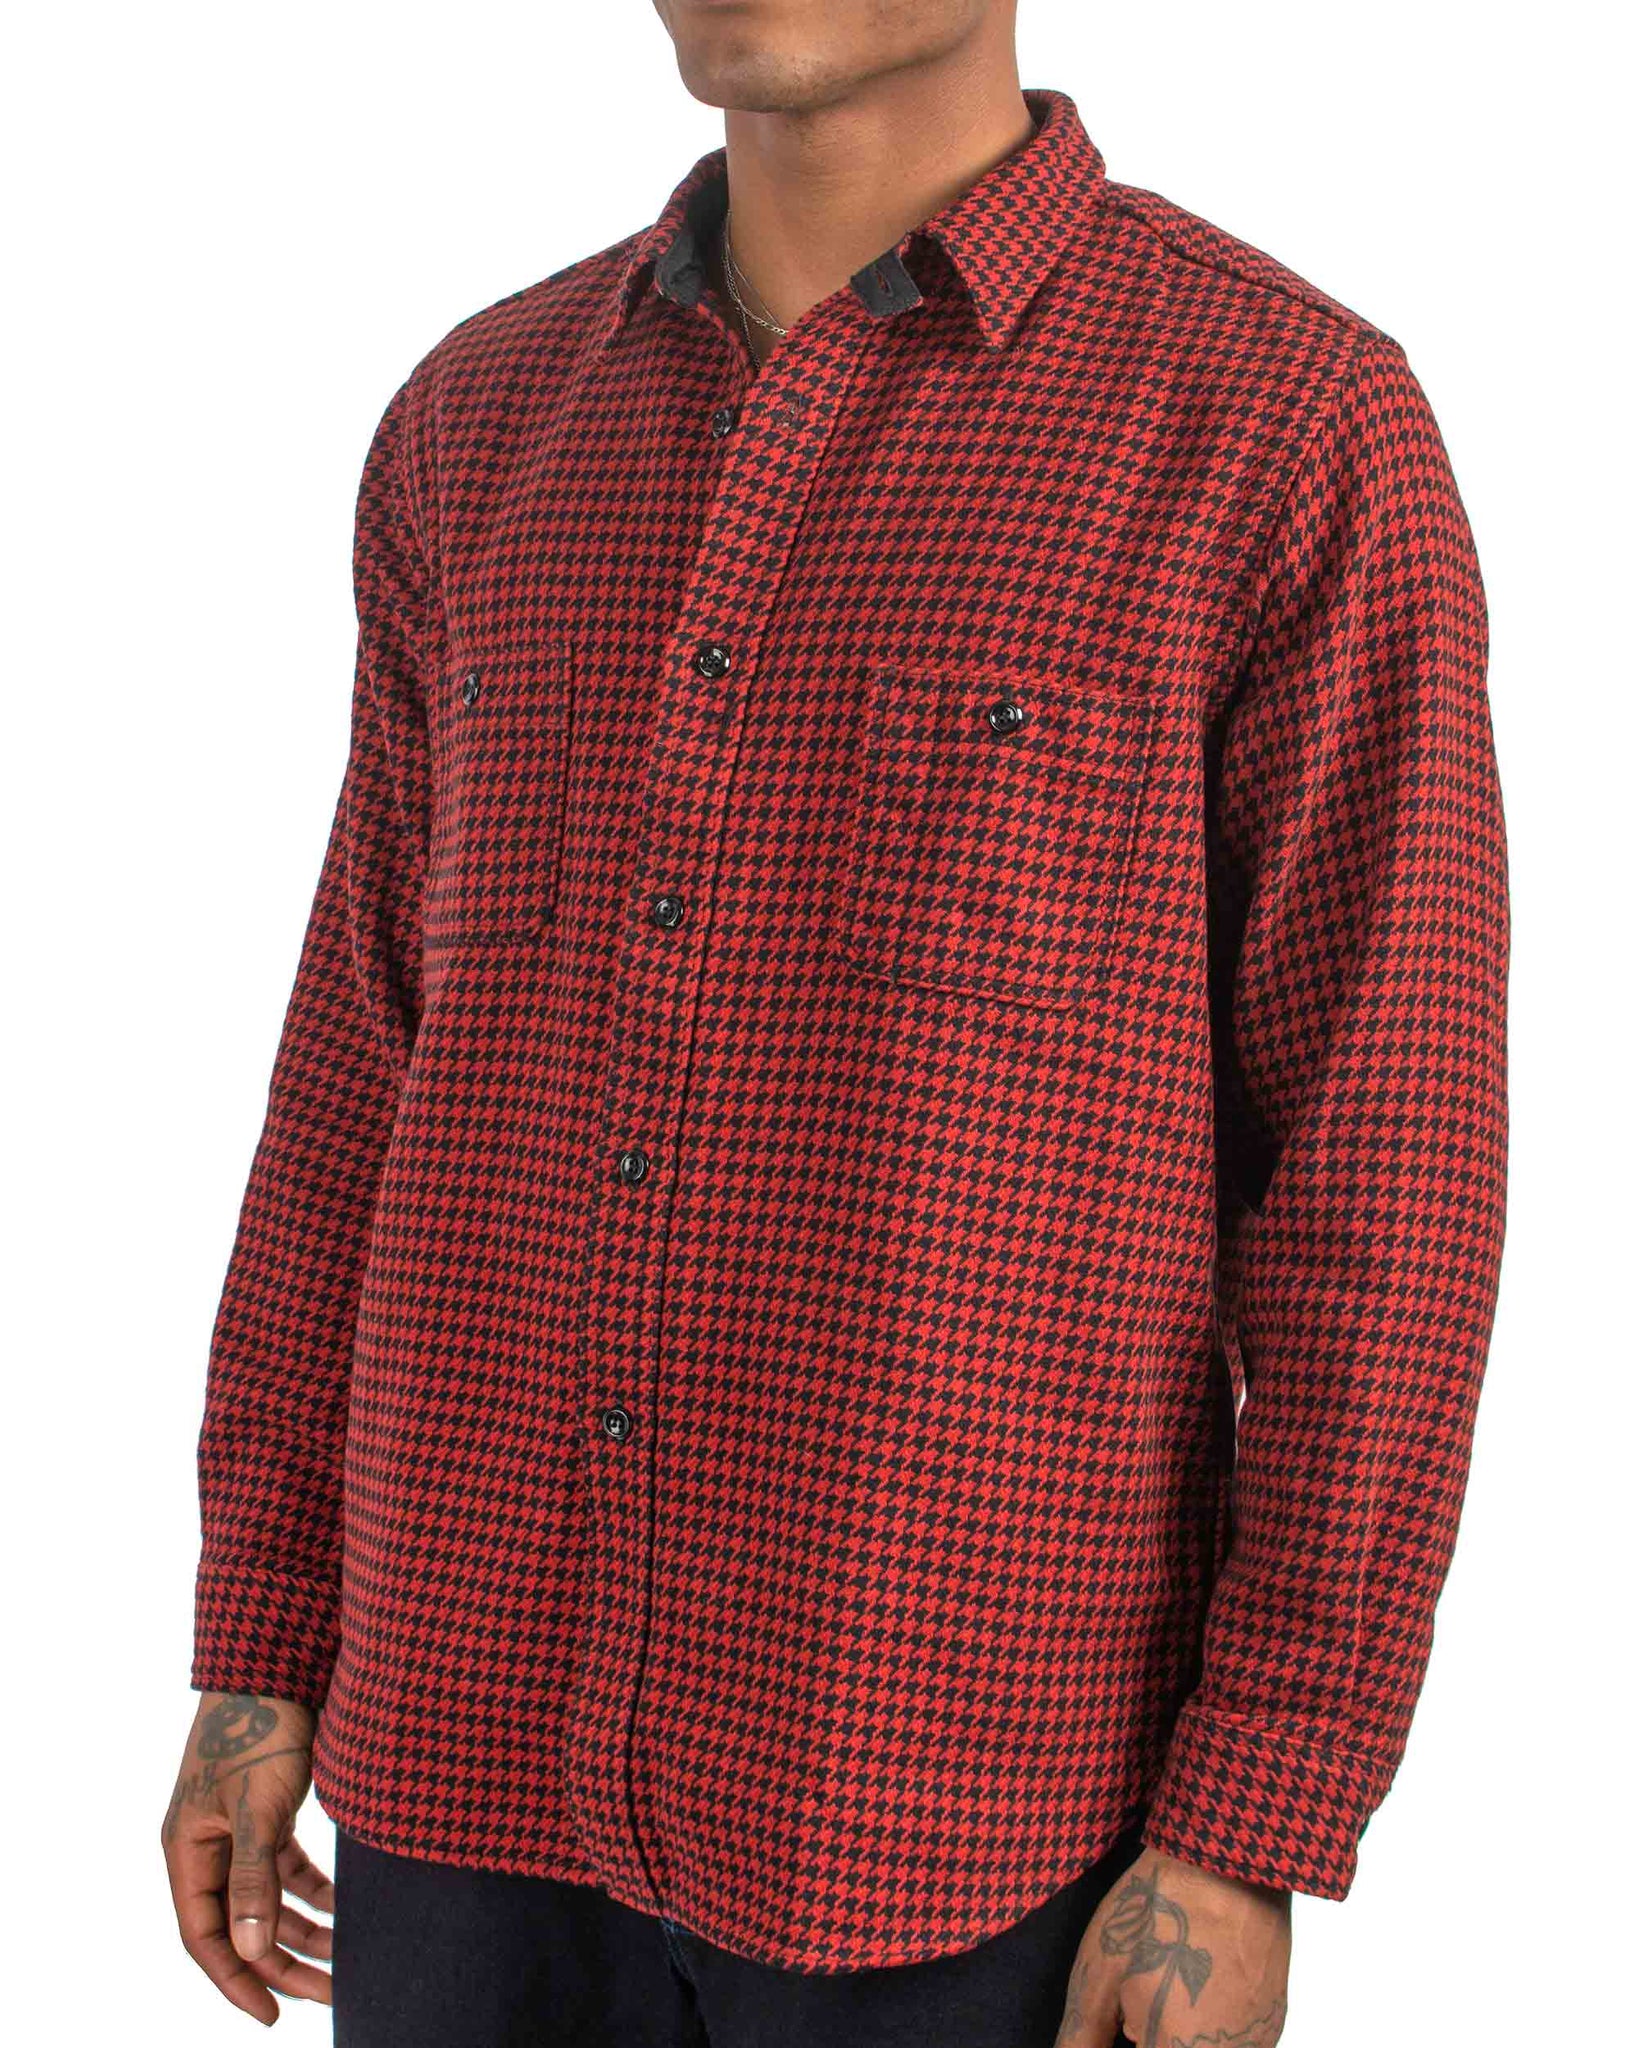 The Real McCoy's MS21102 8HU Houndstooth Flannel Shirt Red Close